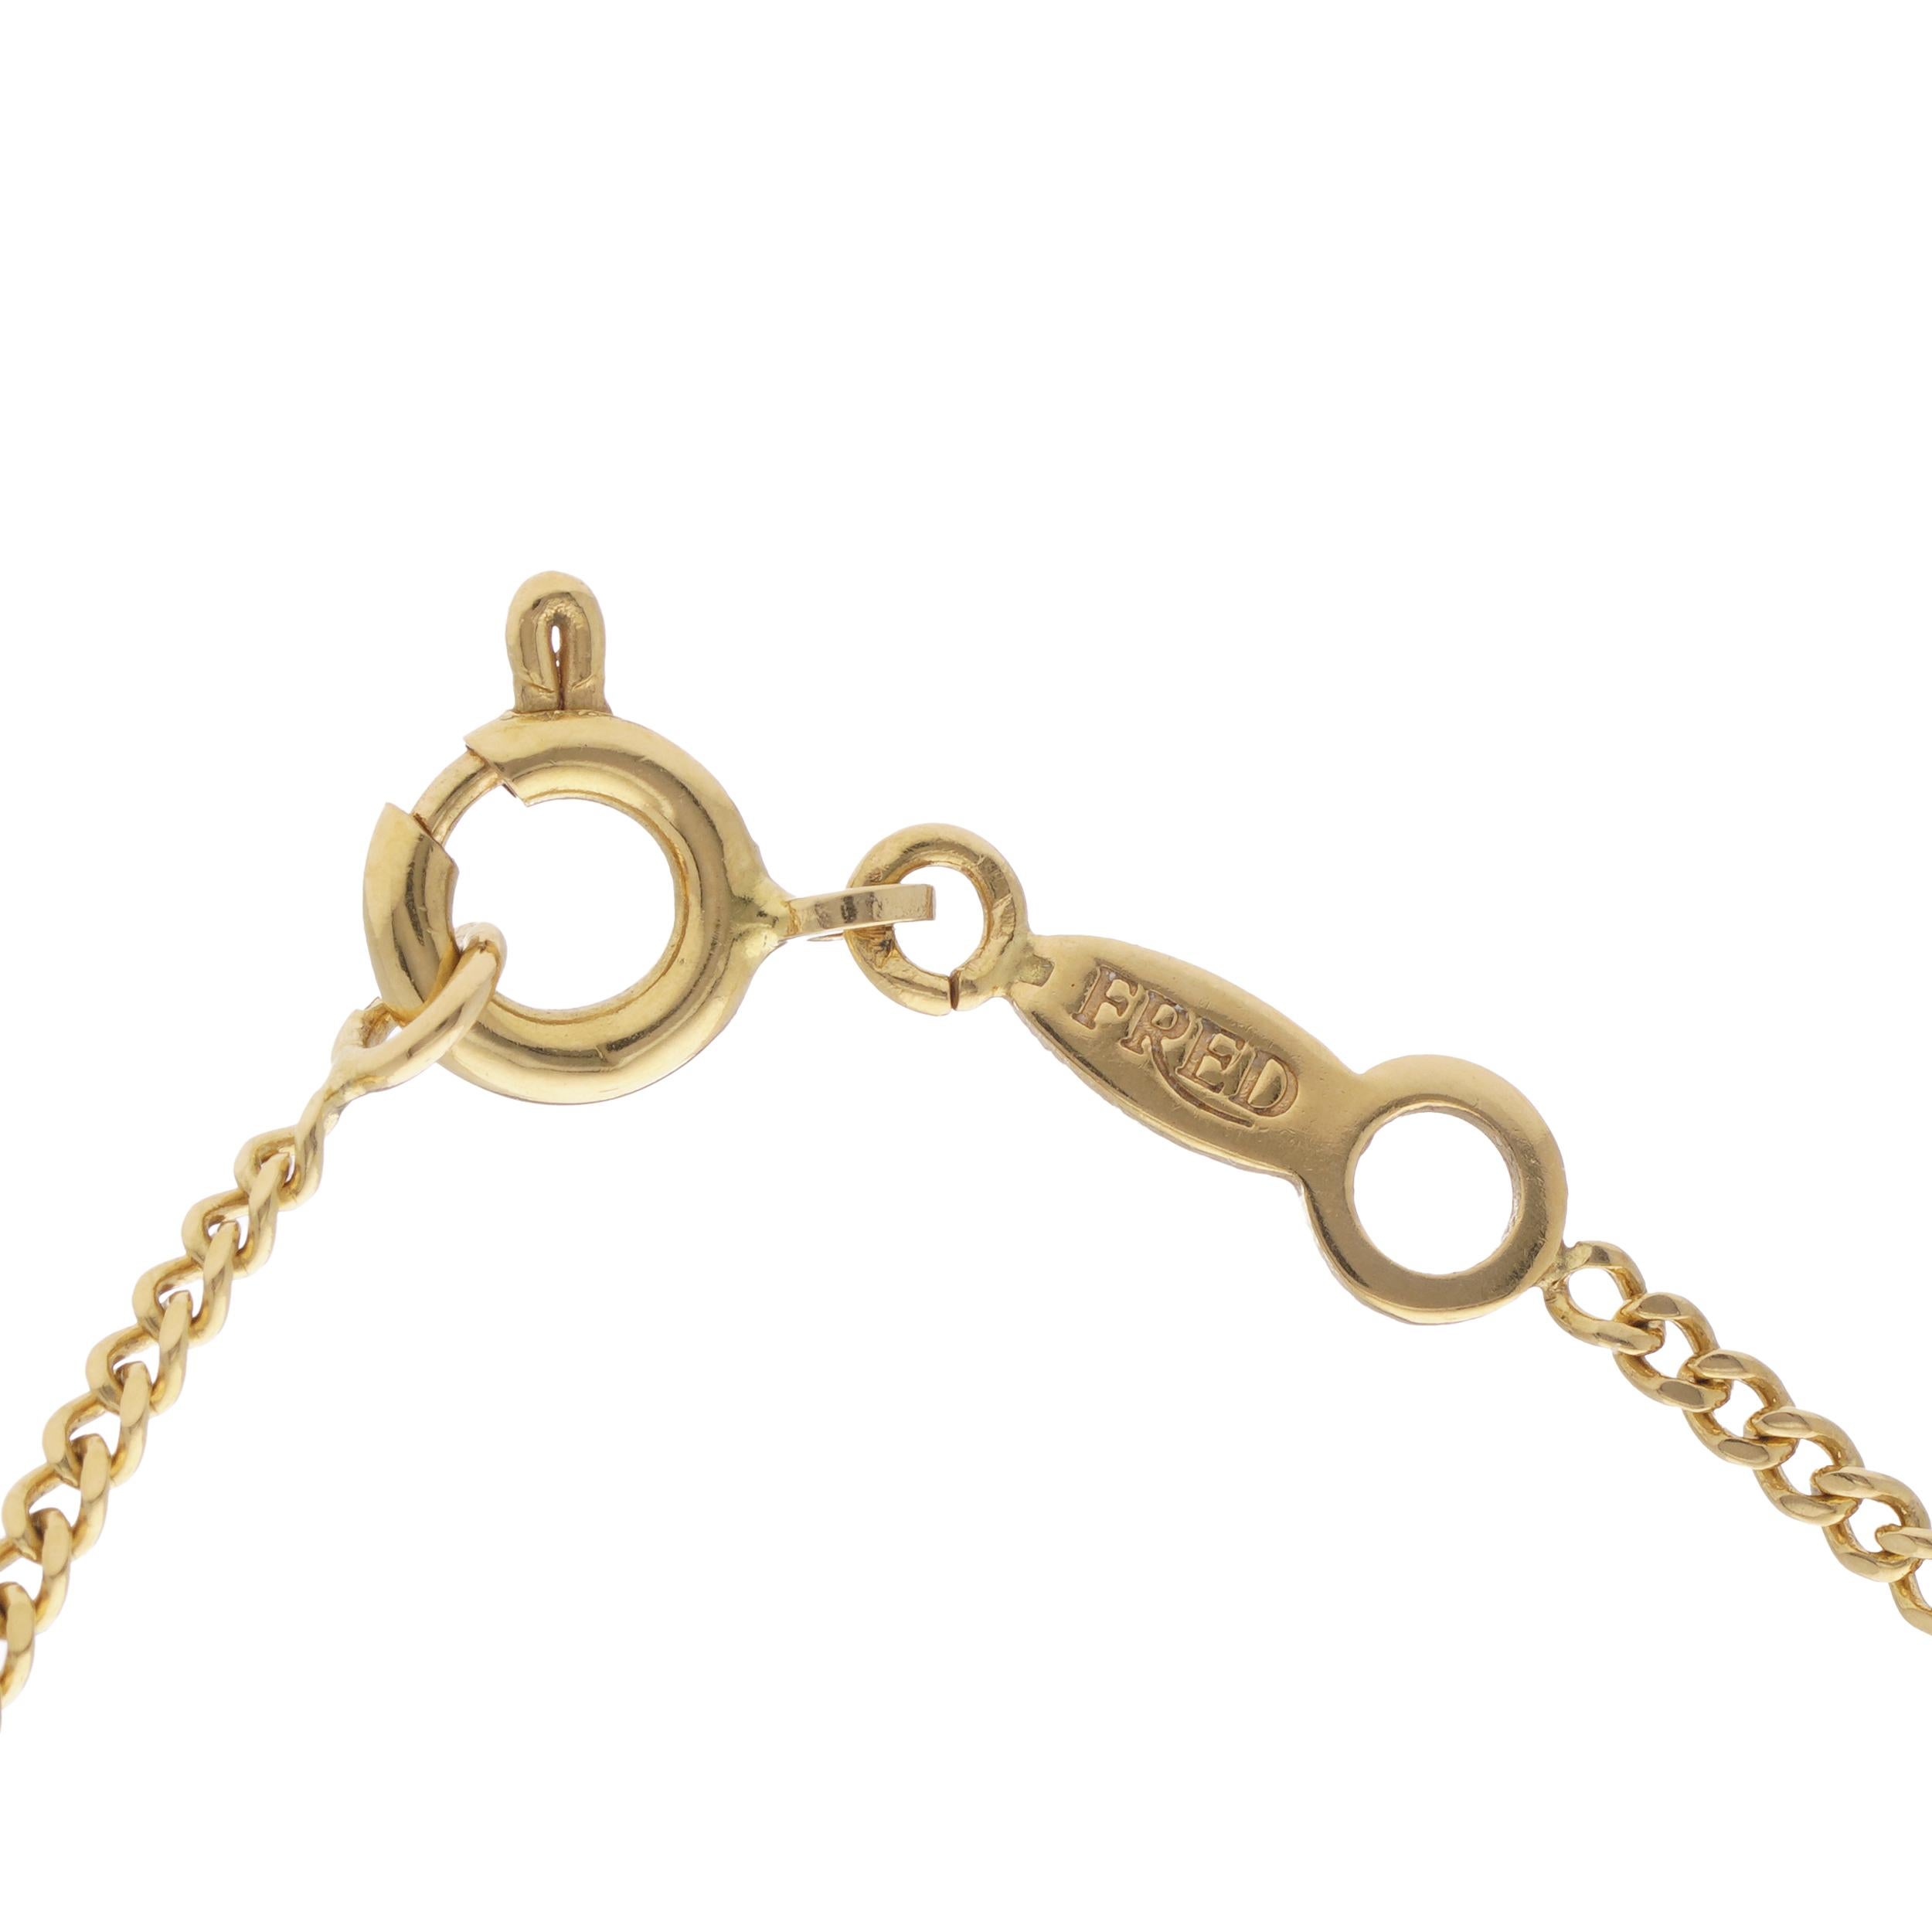 Fred Paris 18kt. yellow gold chain necklace with kitty holding ruby pendant 5